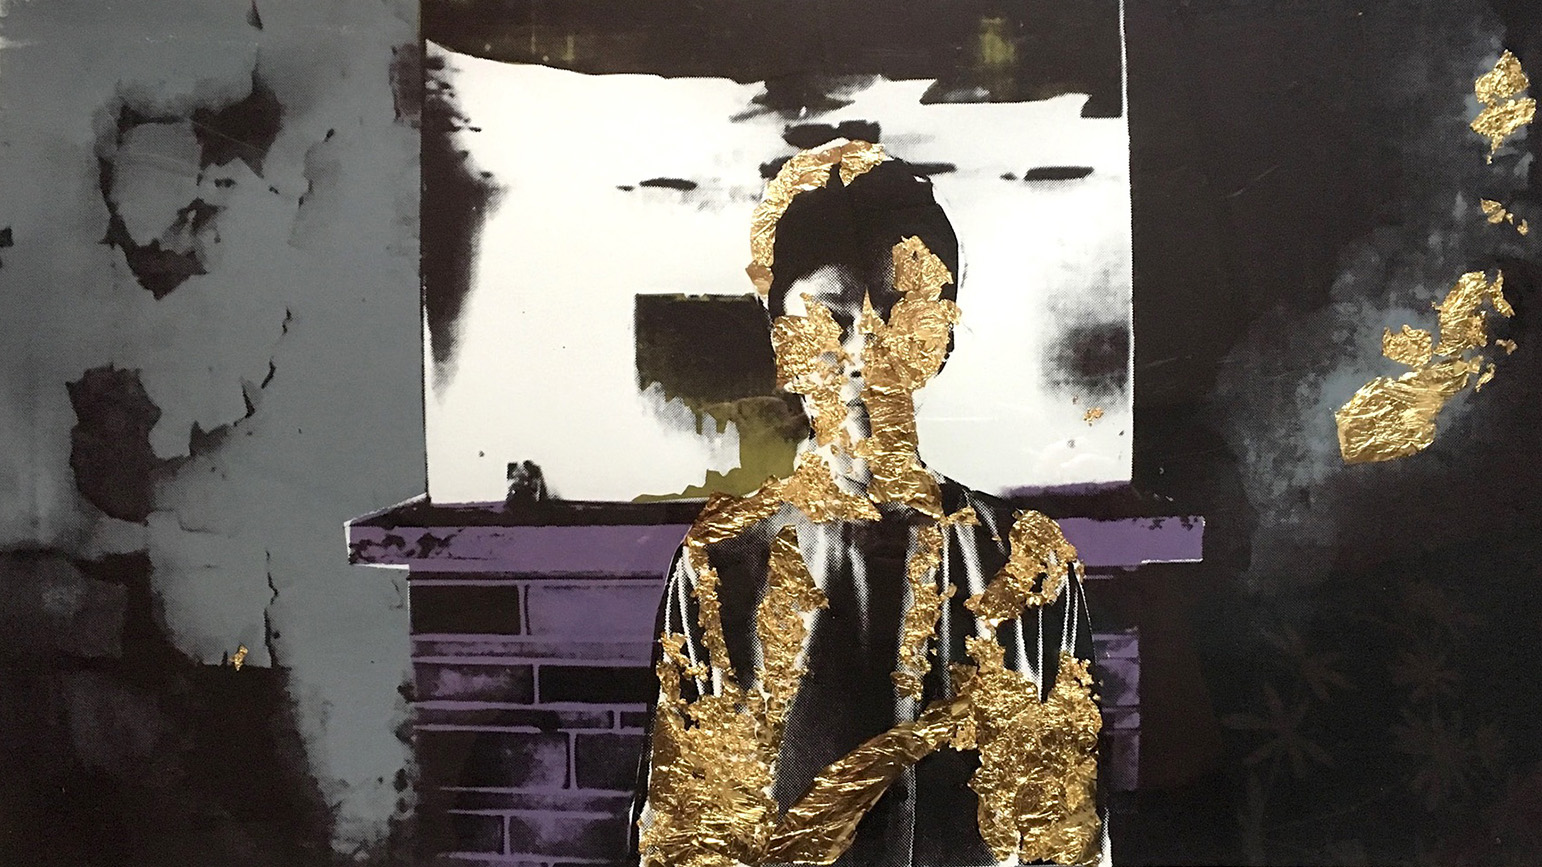 Screenprint of a woman standing in front of a fireplace with gold leaf